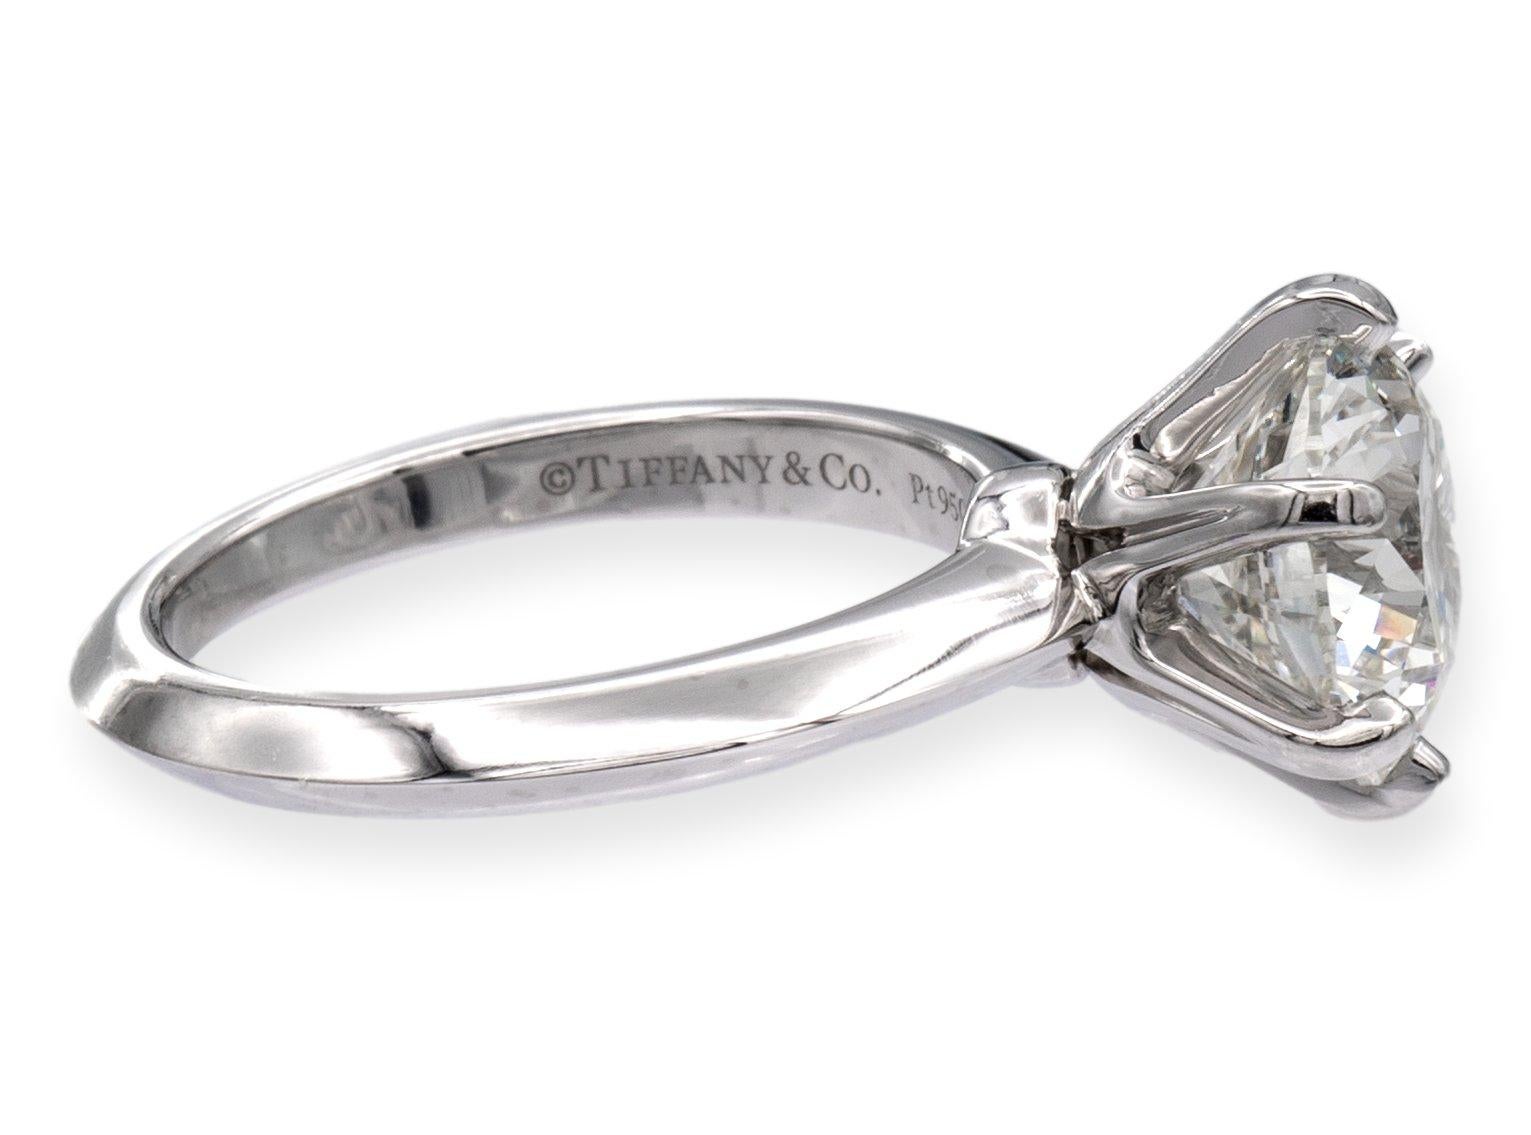 Tiffany & Co Platinum Solitaire Engagement Ring is a timeless and elegant piece that symbolizes love and commitment. The ring is finely crafted with a six-prong platinum mounting, showcasing the 3.24-carat round brilliant cut diamond at the center.